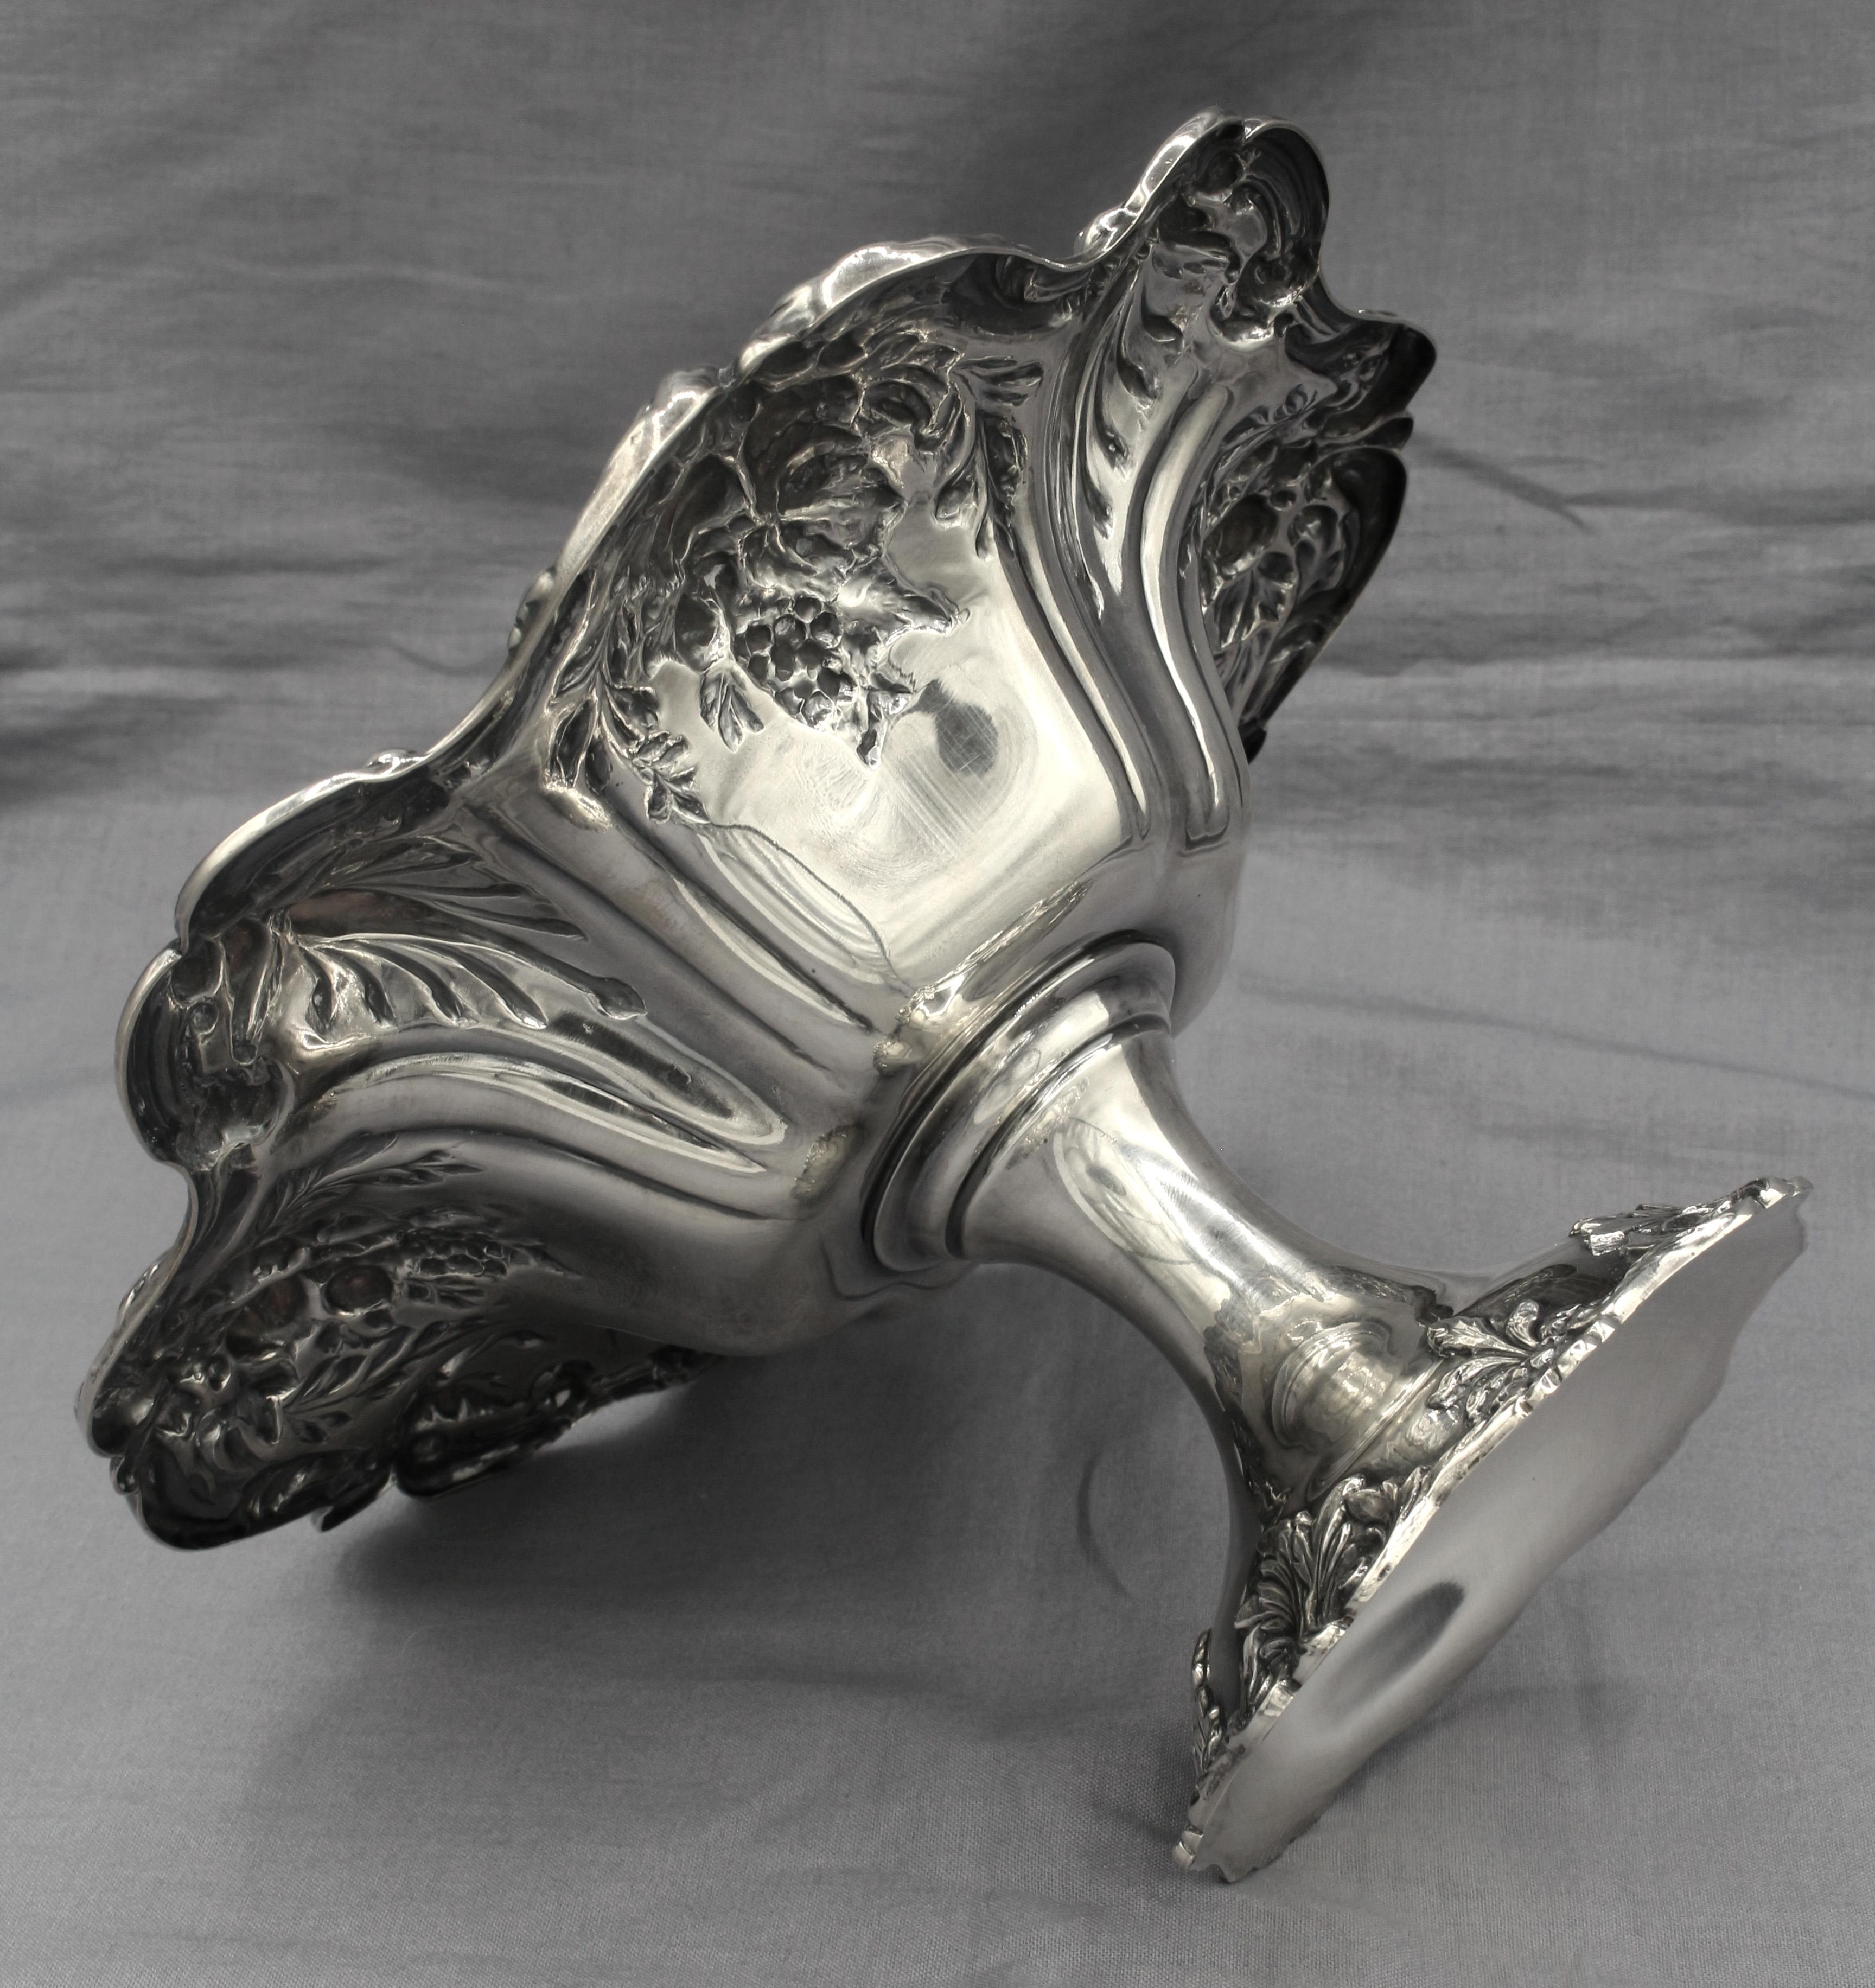 Mid-20th century sterling silver compote, Francis I pattern by Reed & Barton. Wonderful repousse work on bowl & foot. Marked: Reed & Barton, Sterling, X568, Francis I. 12.65 troy oz.
8